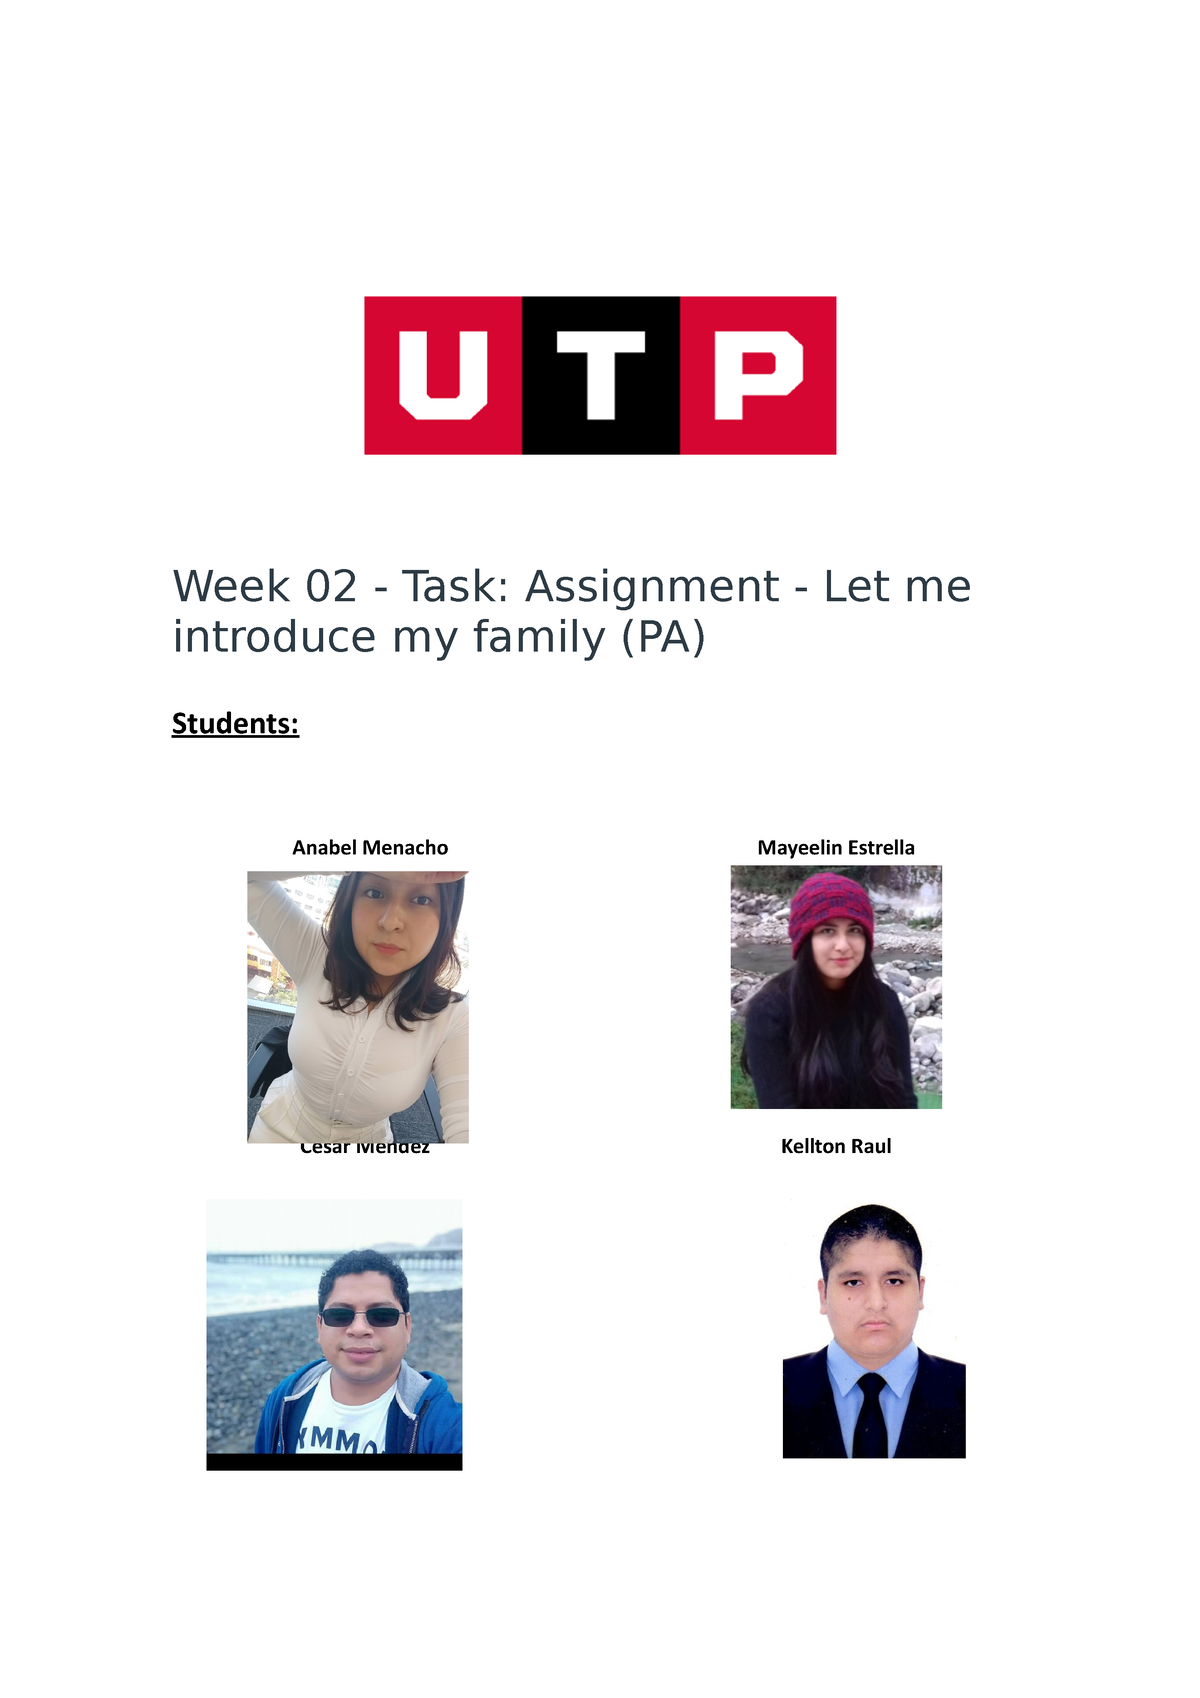 task assignment let me introduce my family